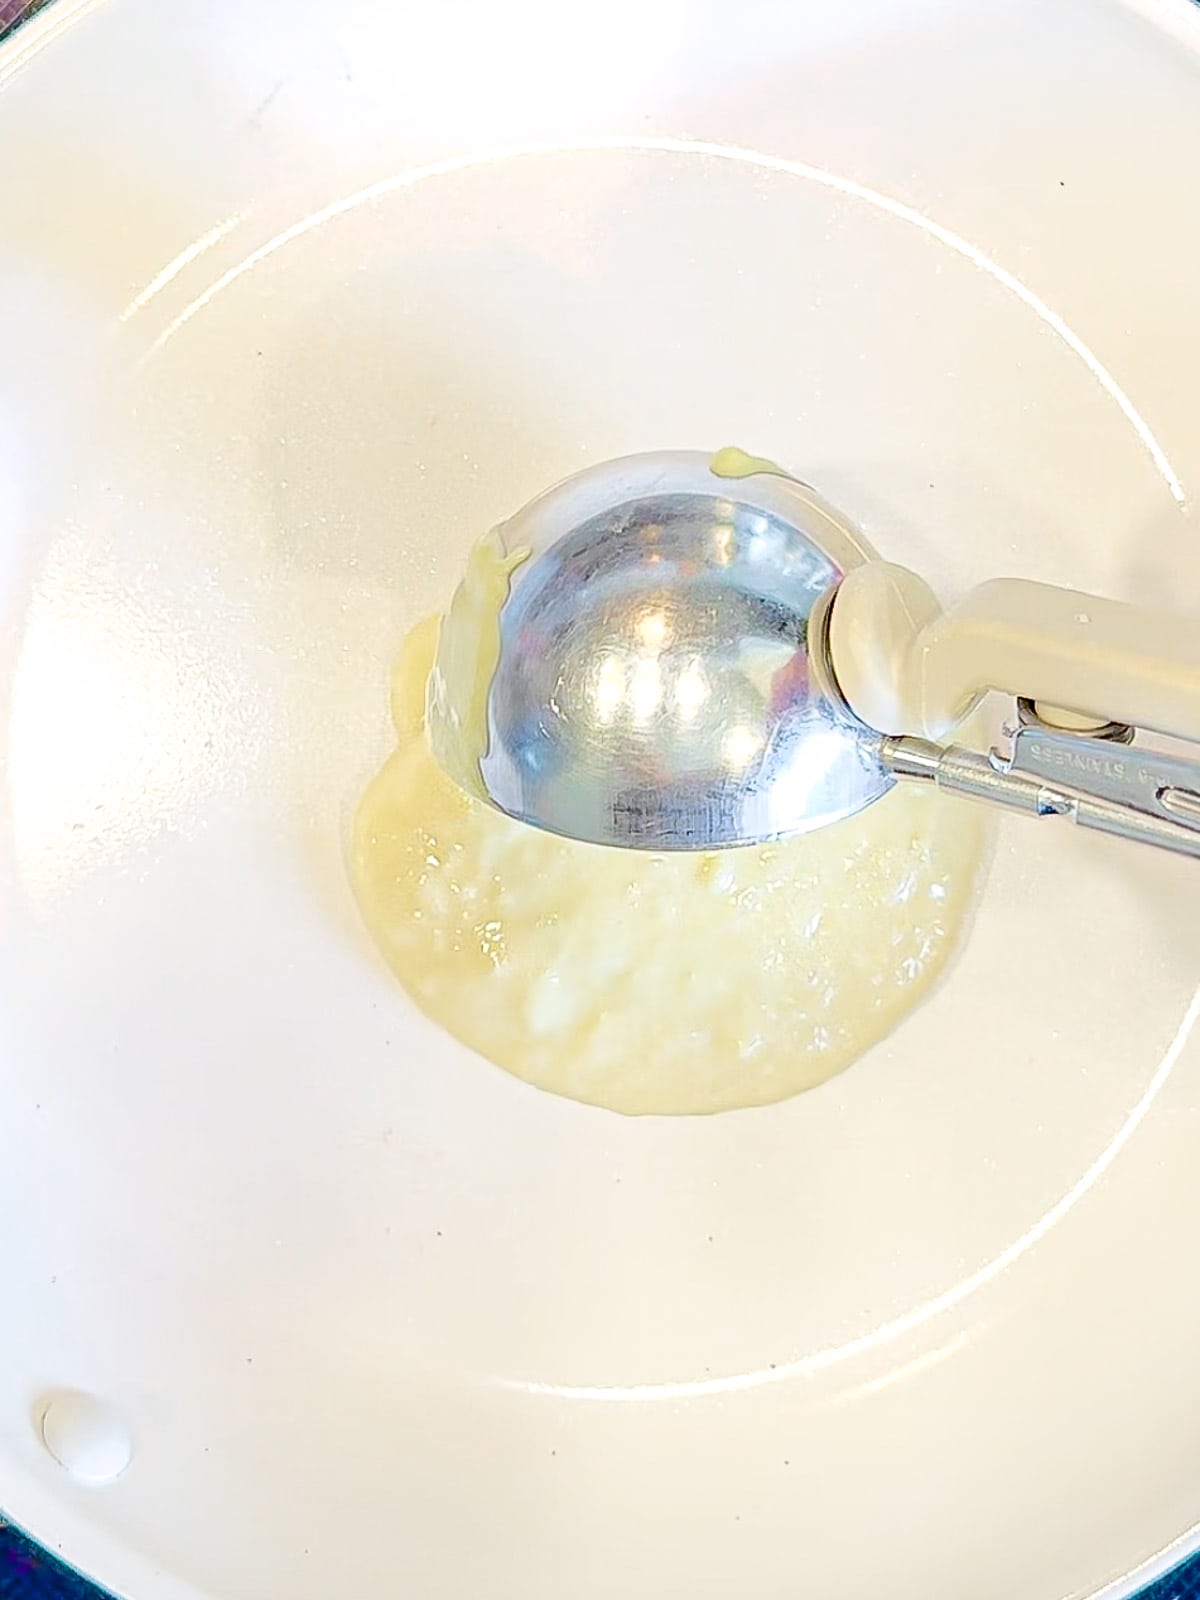 Using a large scoop to portion out three ingredient, pancake batter.